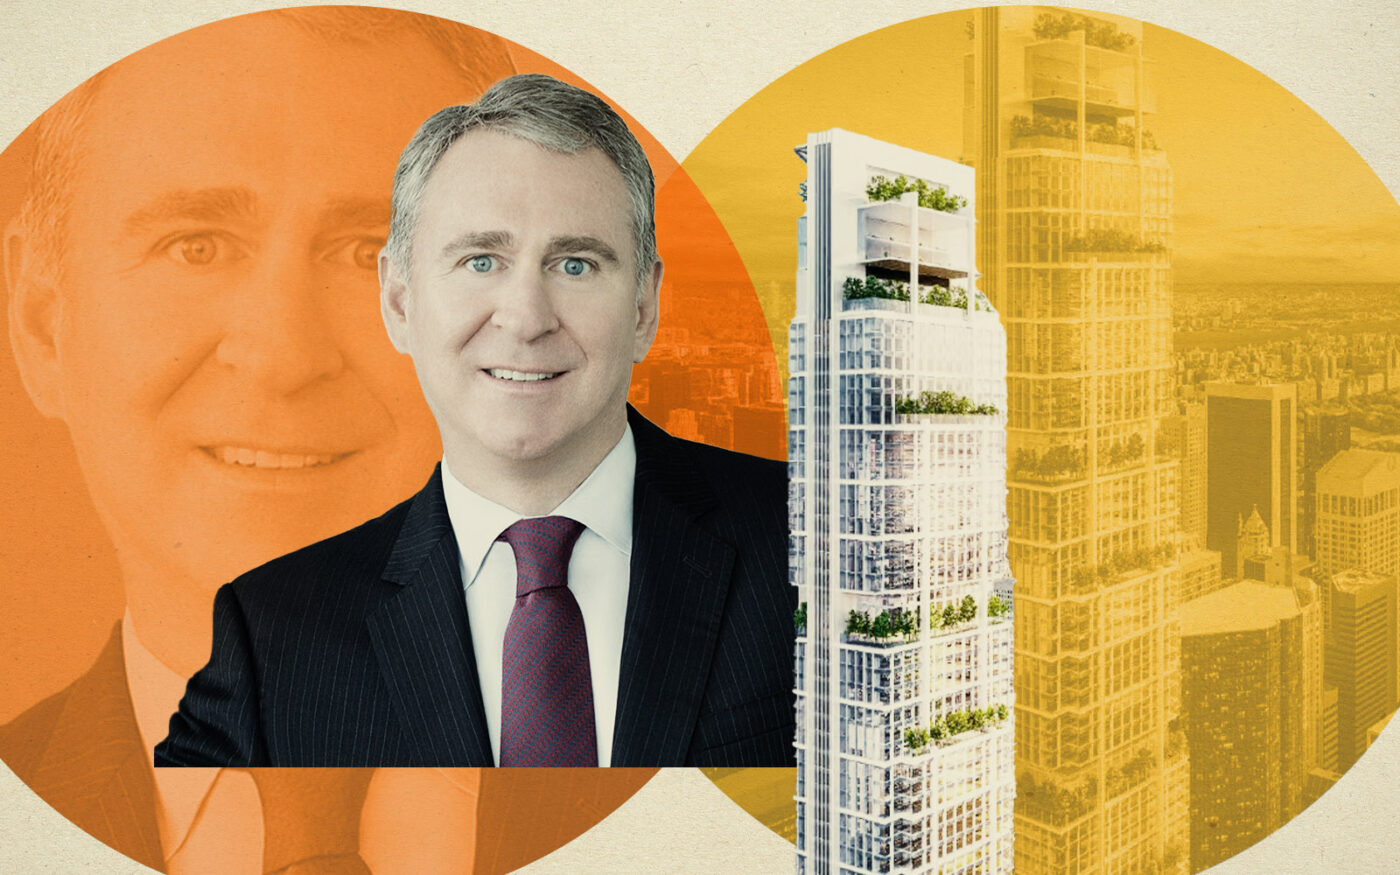 Ken Griffin Agrees to $78M Deal for More Church Air Rights